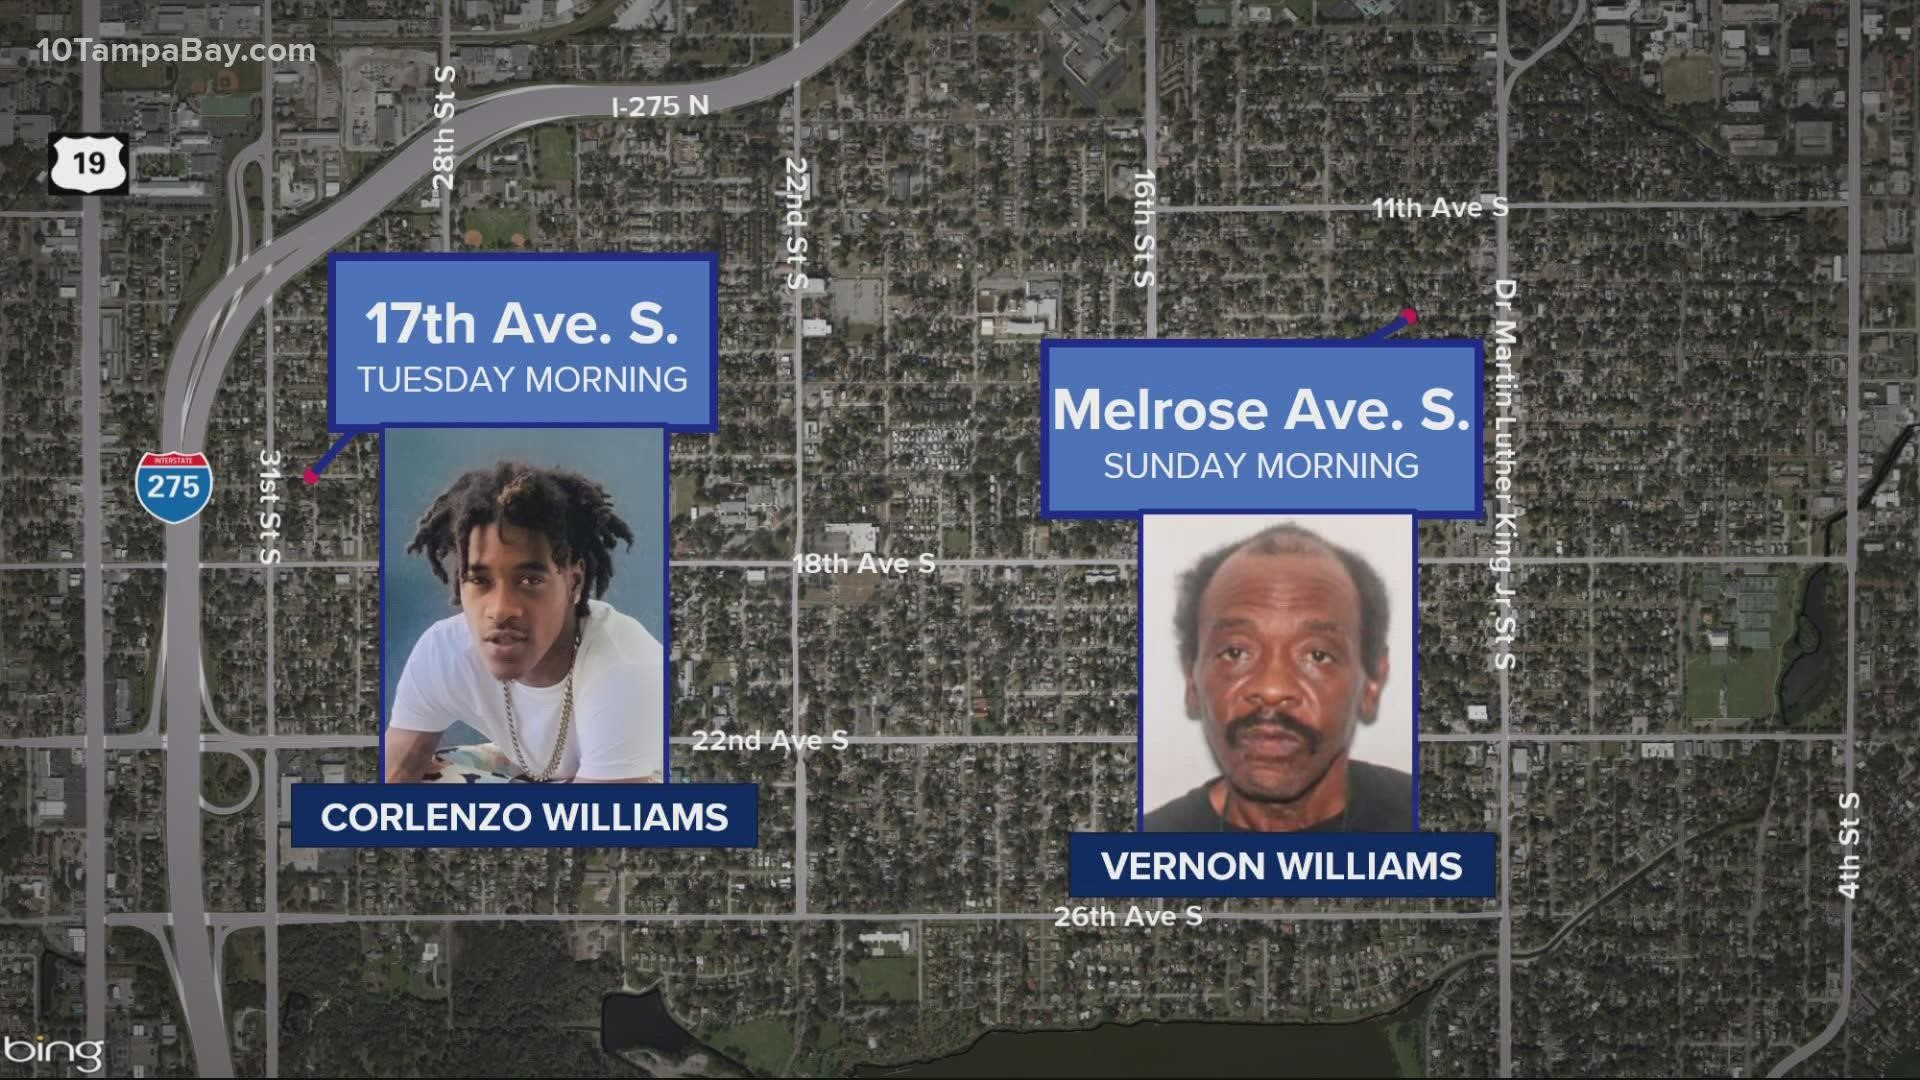 Police are asking anyone with information about the death of Corlenzo Williams to come forward.